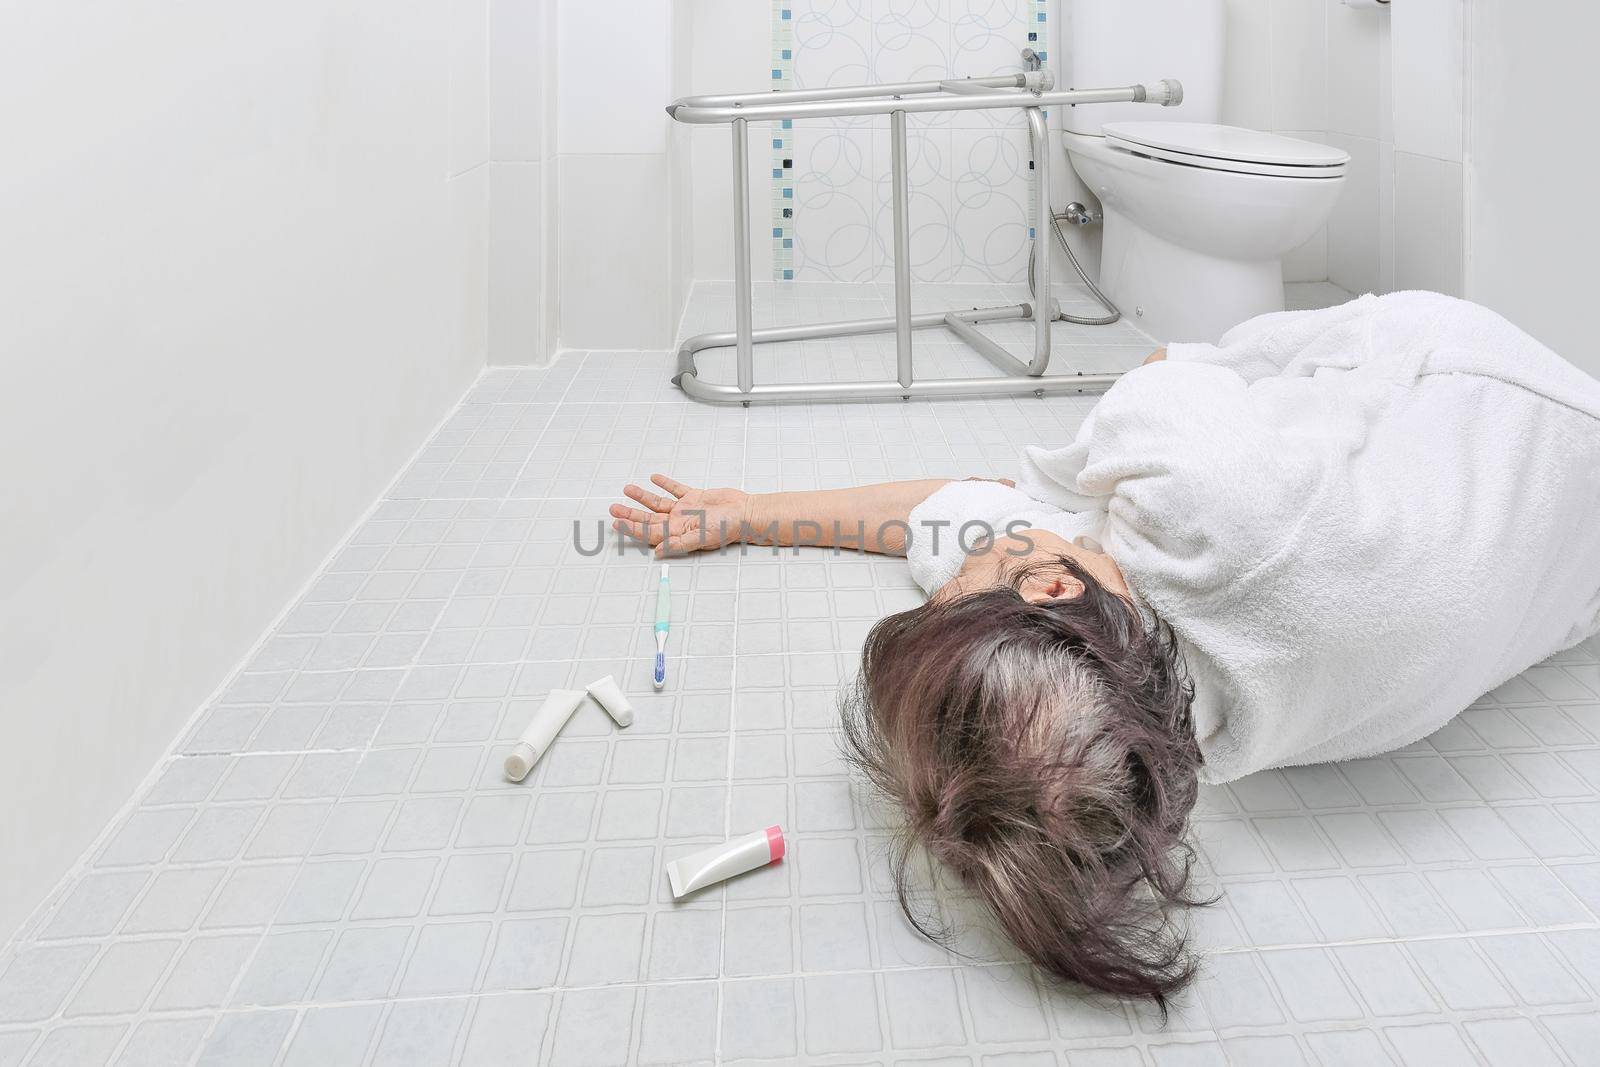 Elderly woman falling in bathroom because slippery surfaces by toa55